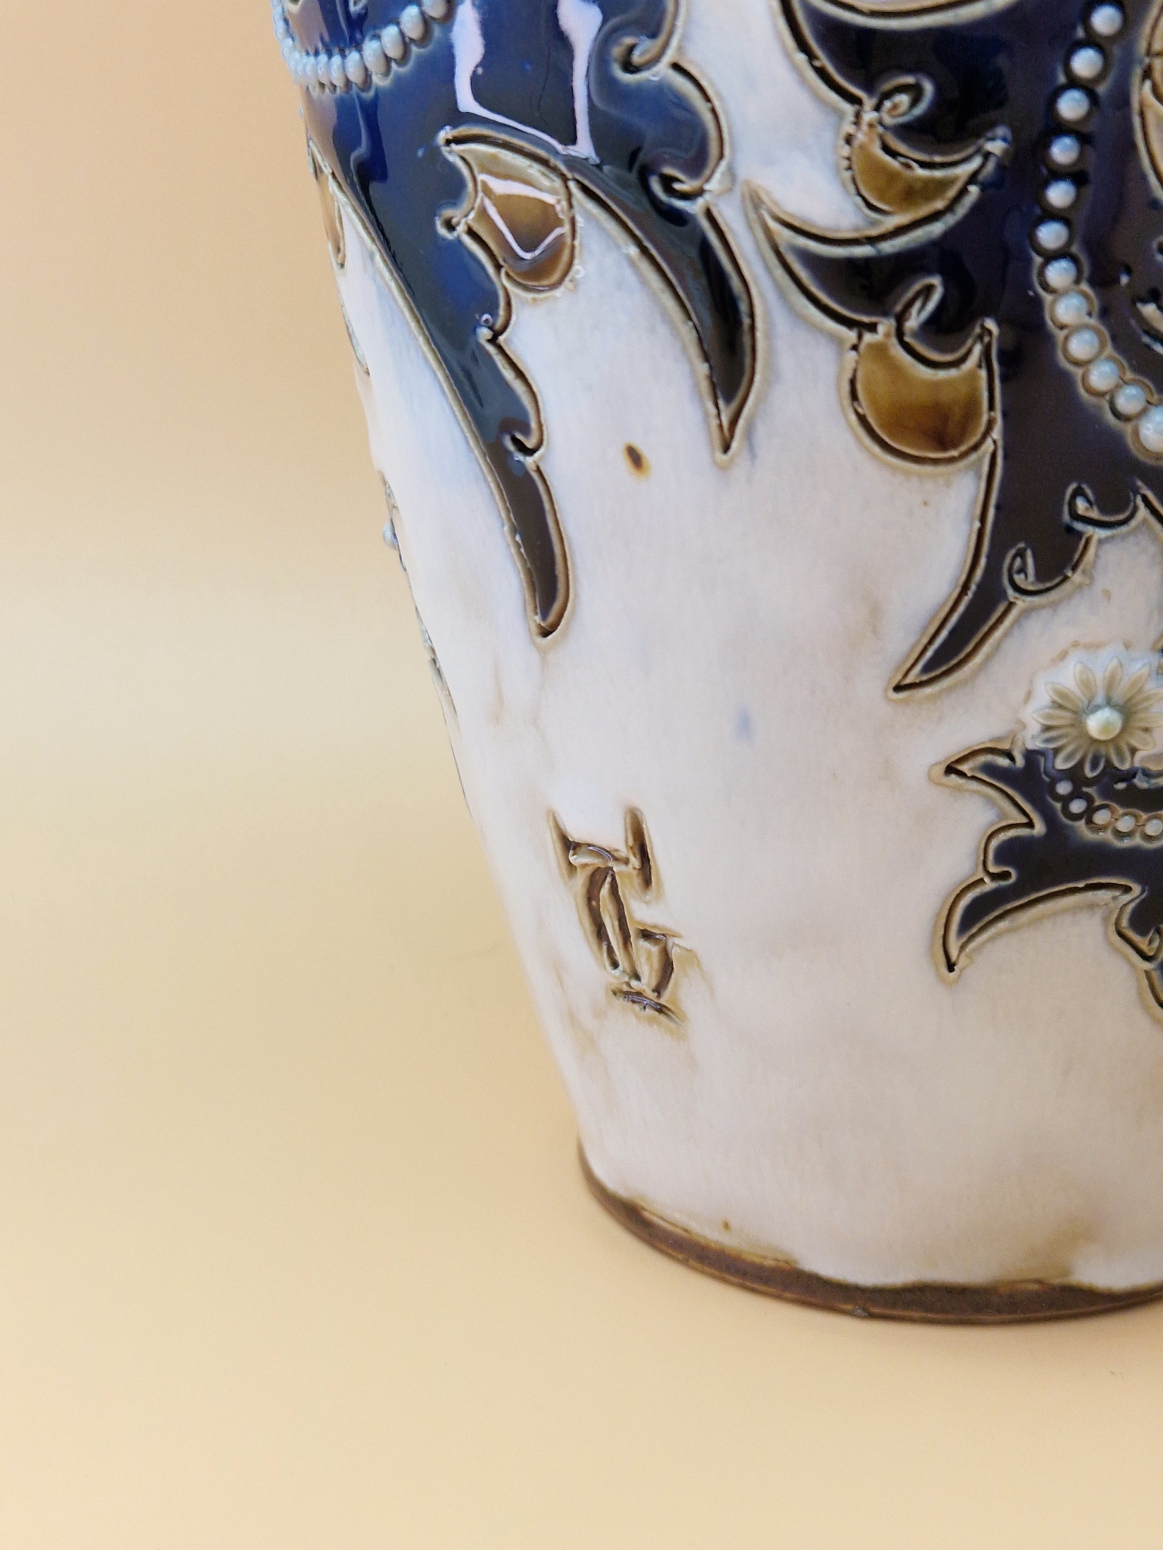 A PAIR OF ROYAL DOULTON VASES BY GEORGE TINWORTH DECORATED IN RELIEF WITH BEADED BLUE VINES - Image 6 of 8